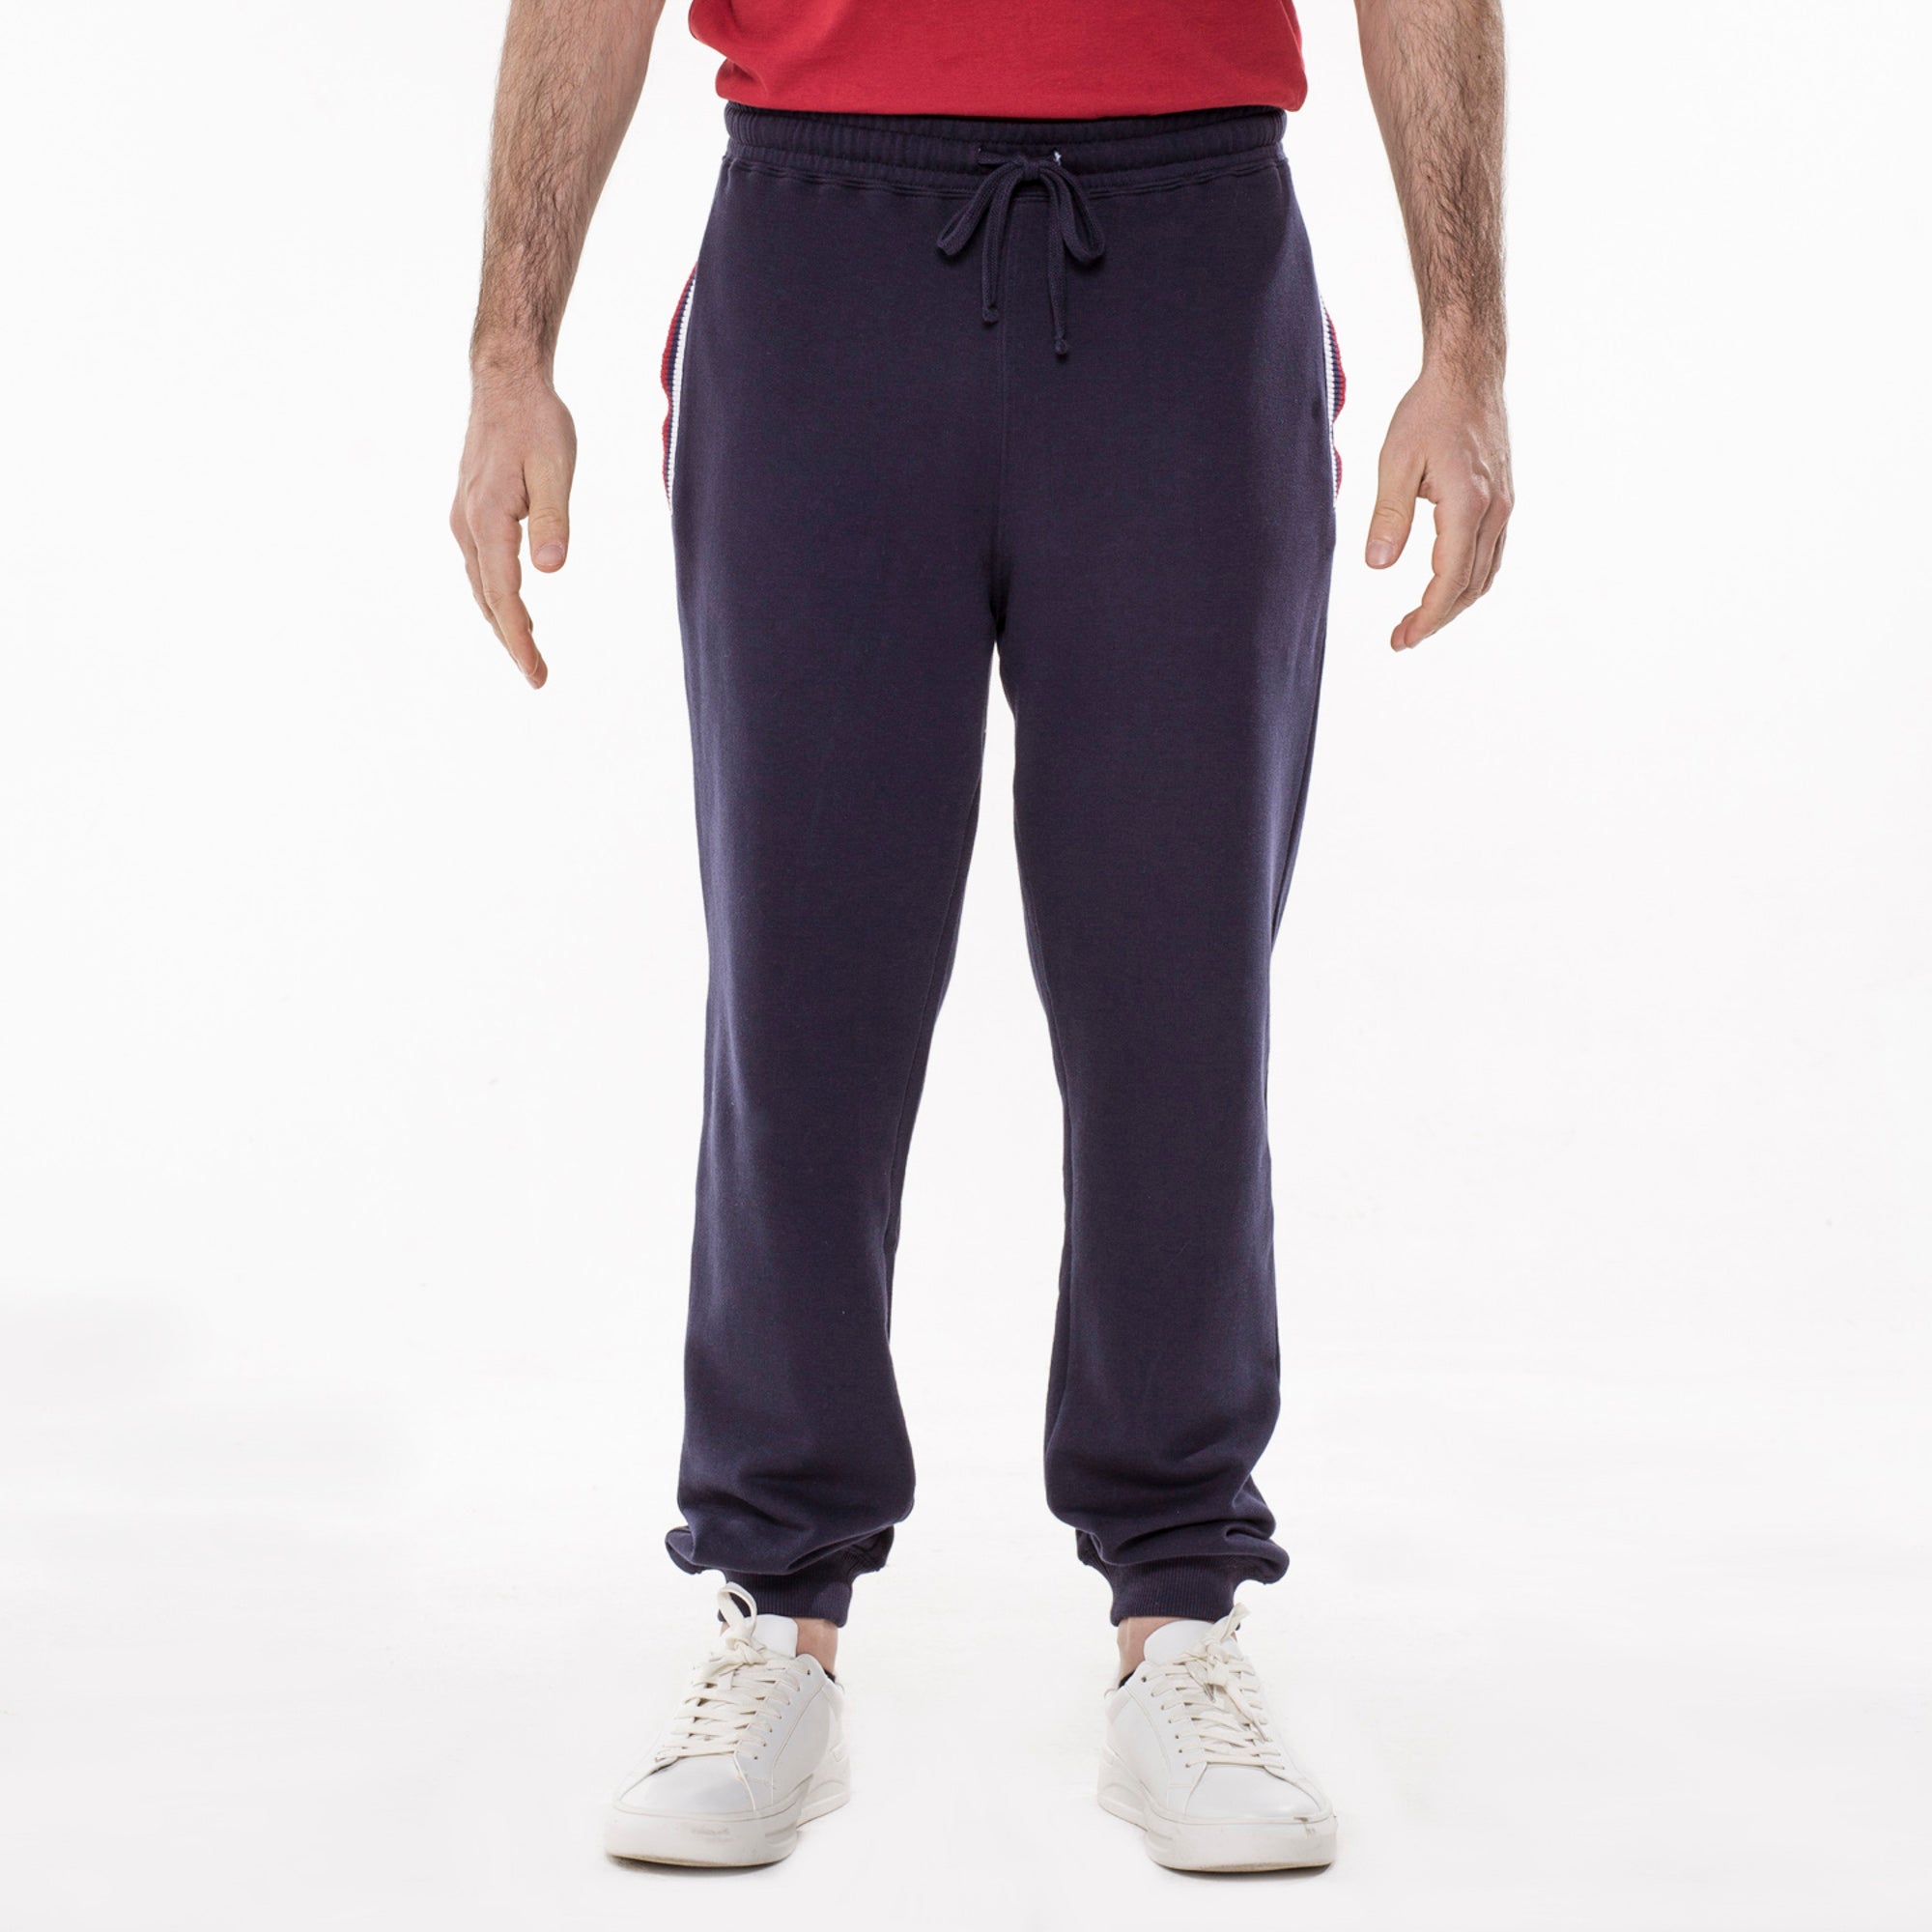 French terry sweatpants